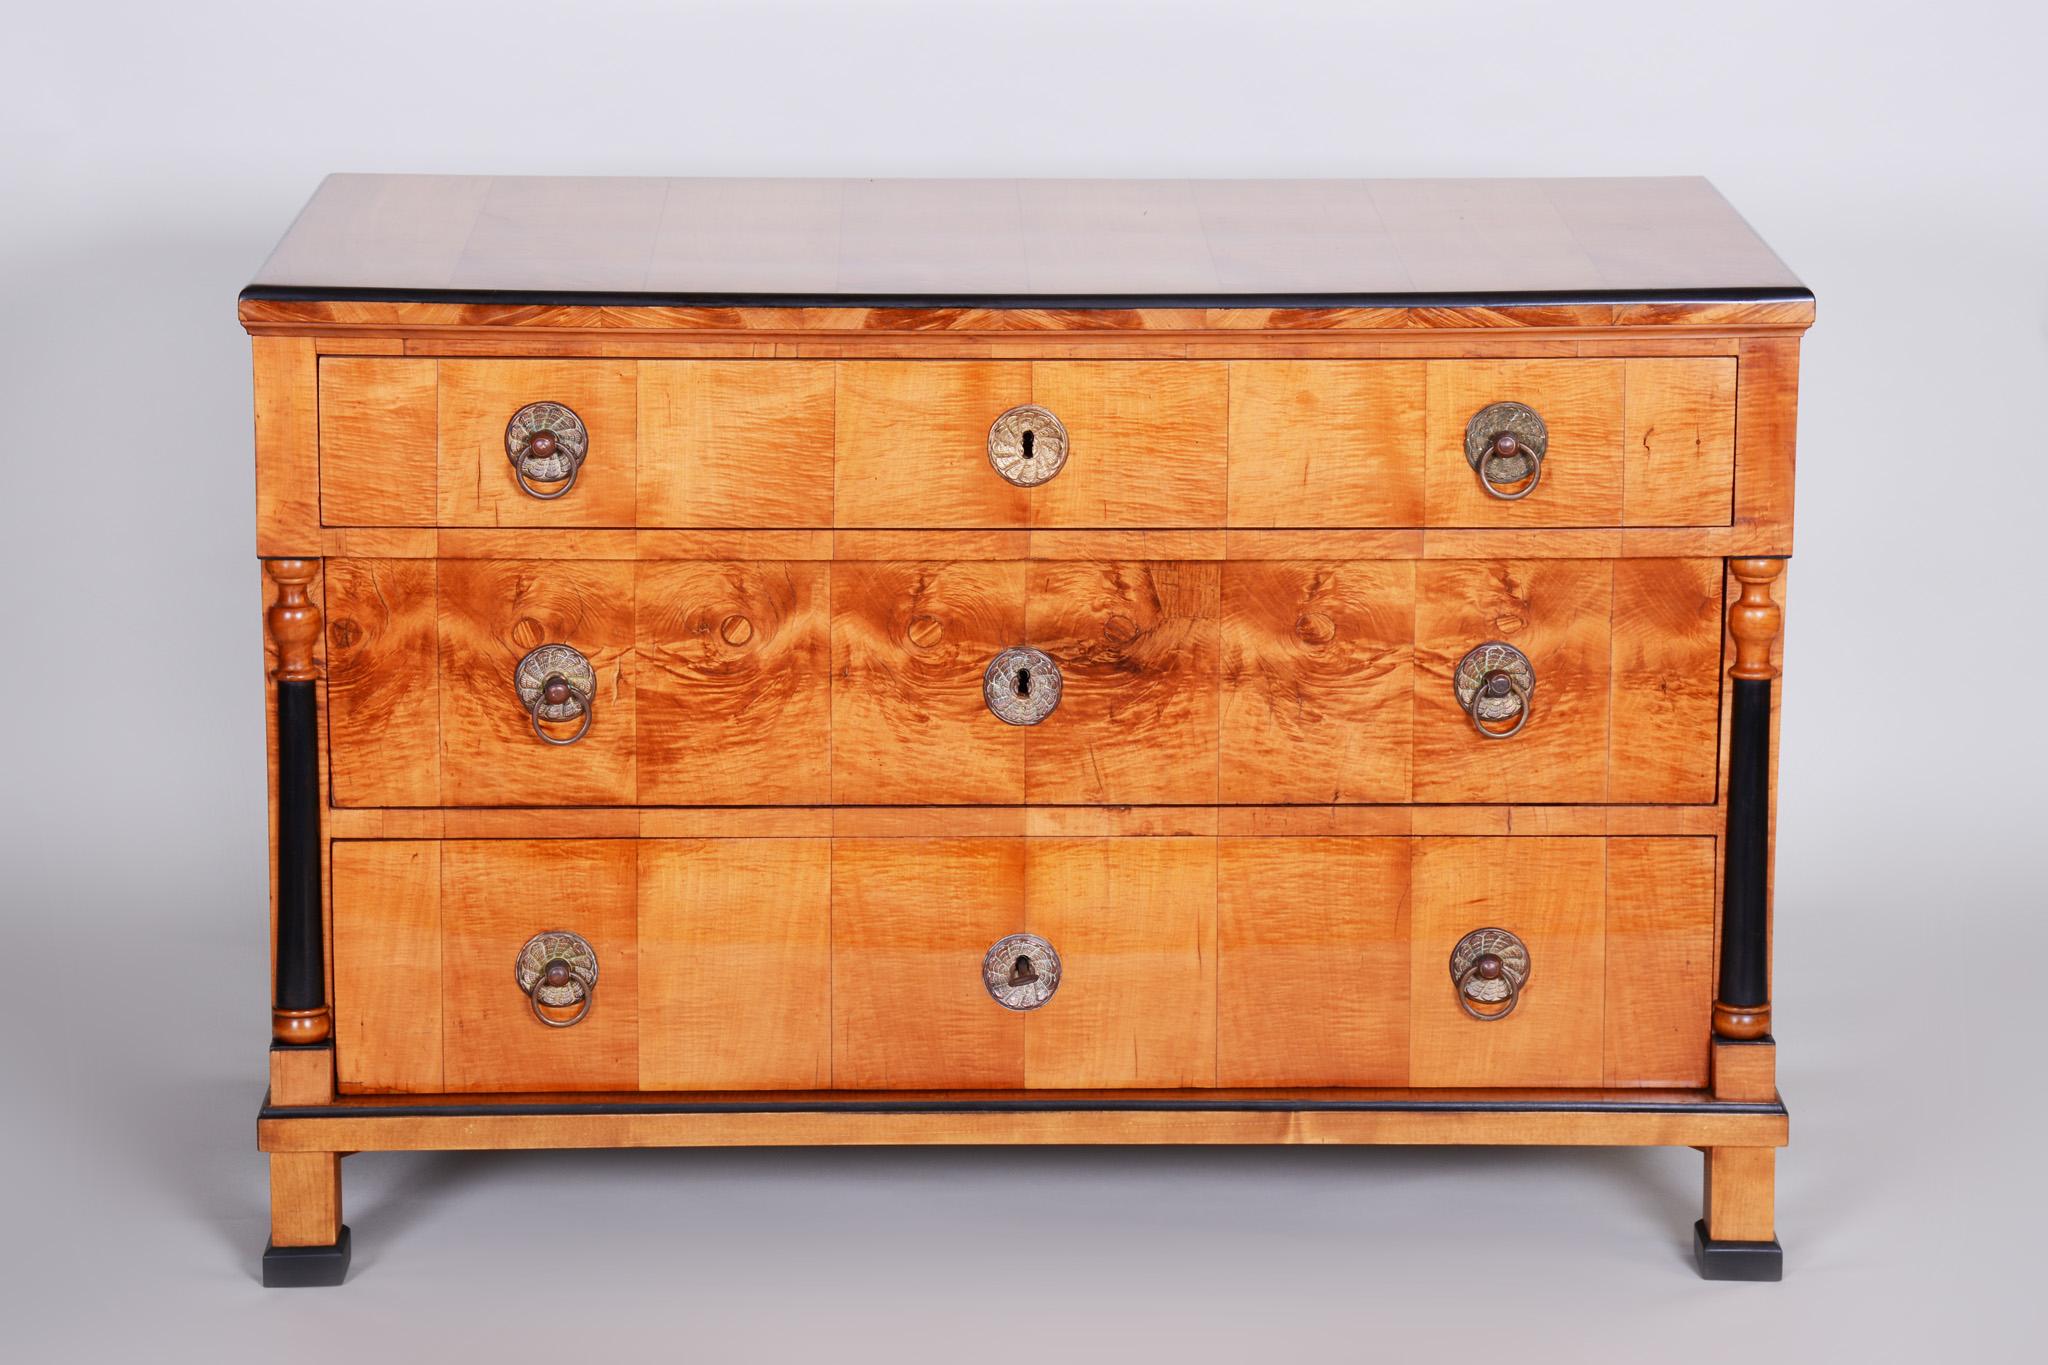 Shipping to any US port only for $290 USD

Biedermeier chest of drawers, commode.
Completely restored. Shellac polish used for the surface.
Country of origin is Austria from period 1820-1829.
Material maple.